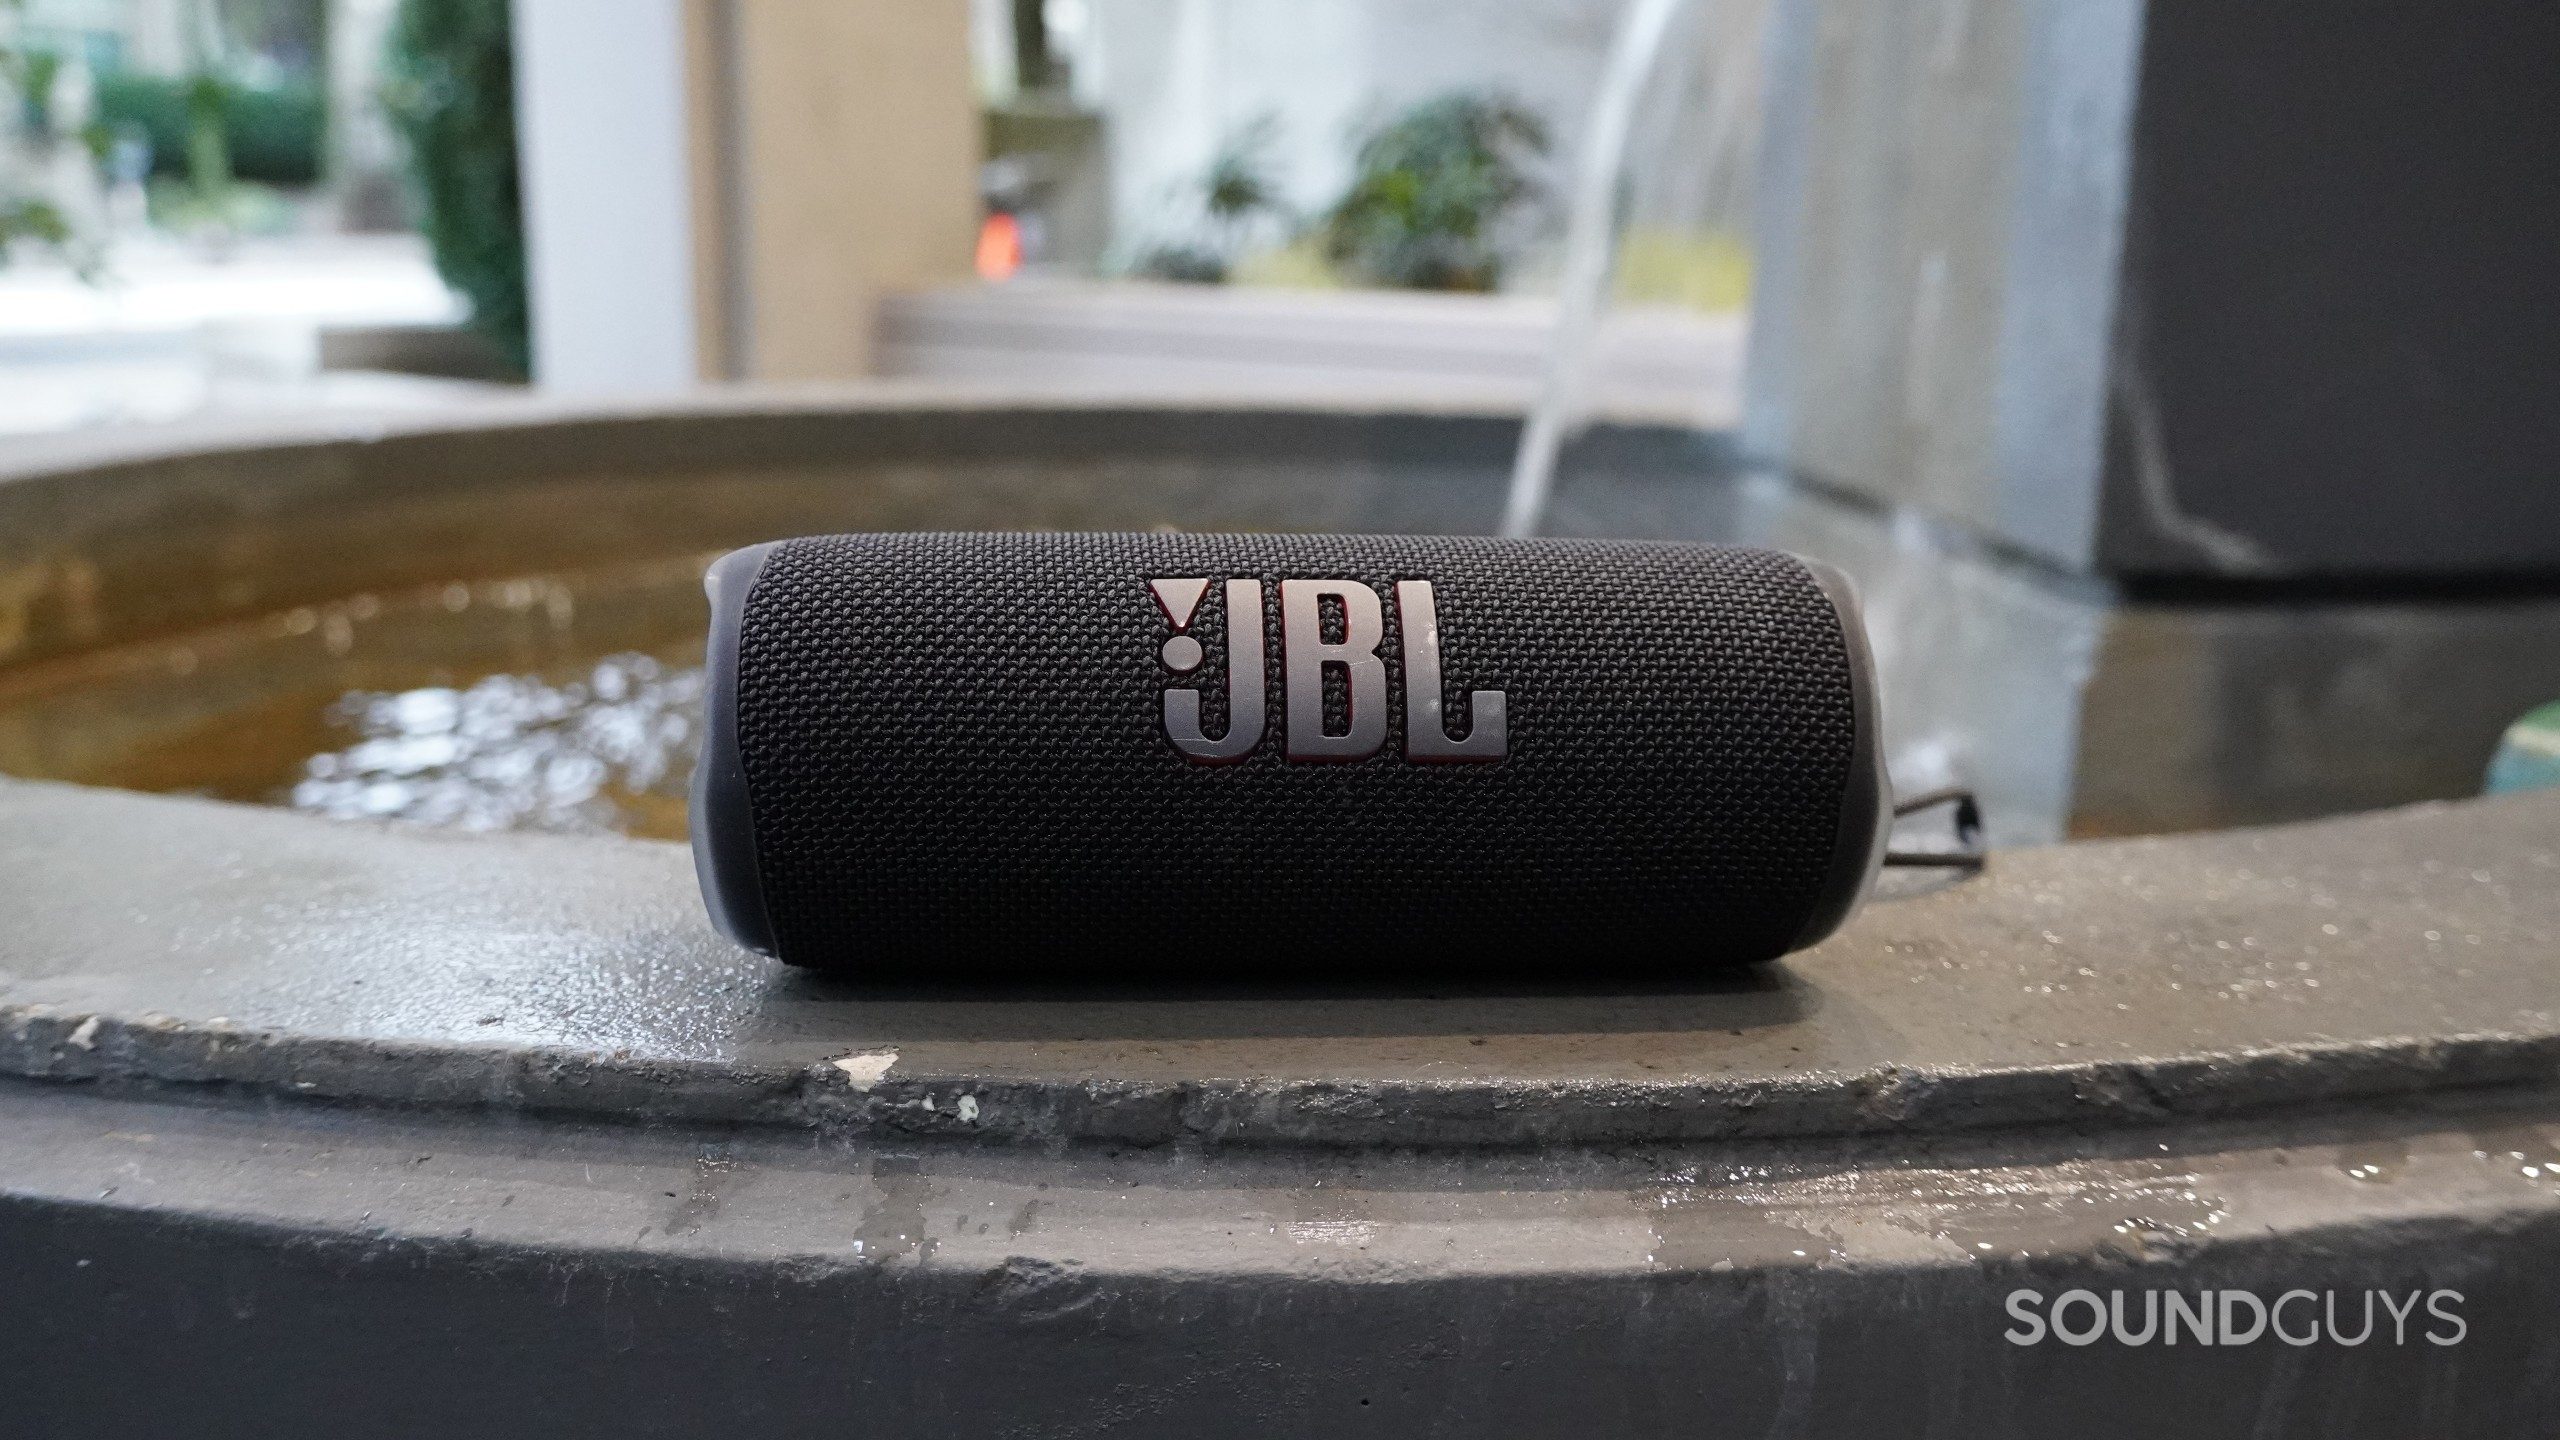 JBL Flip 5 using USB C to AUX adapter] is it possible to use a